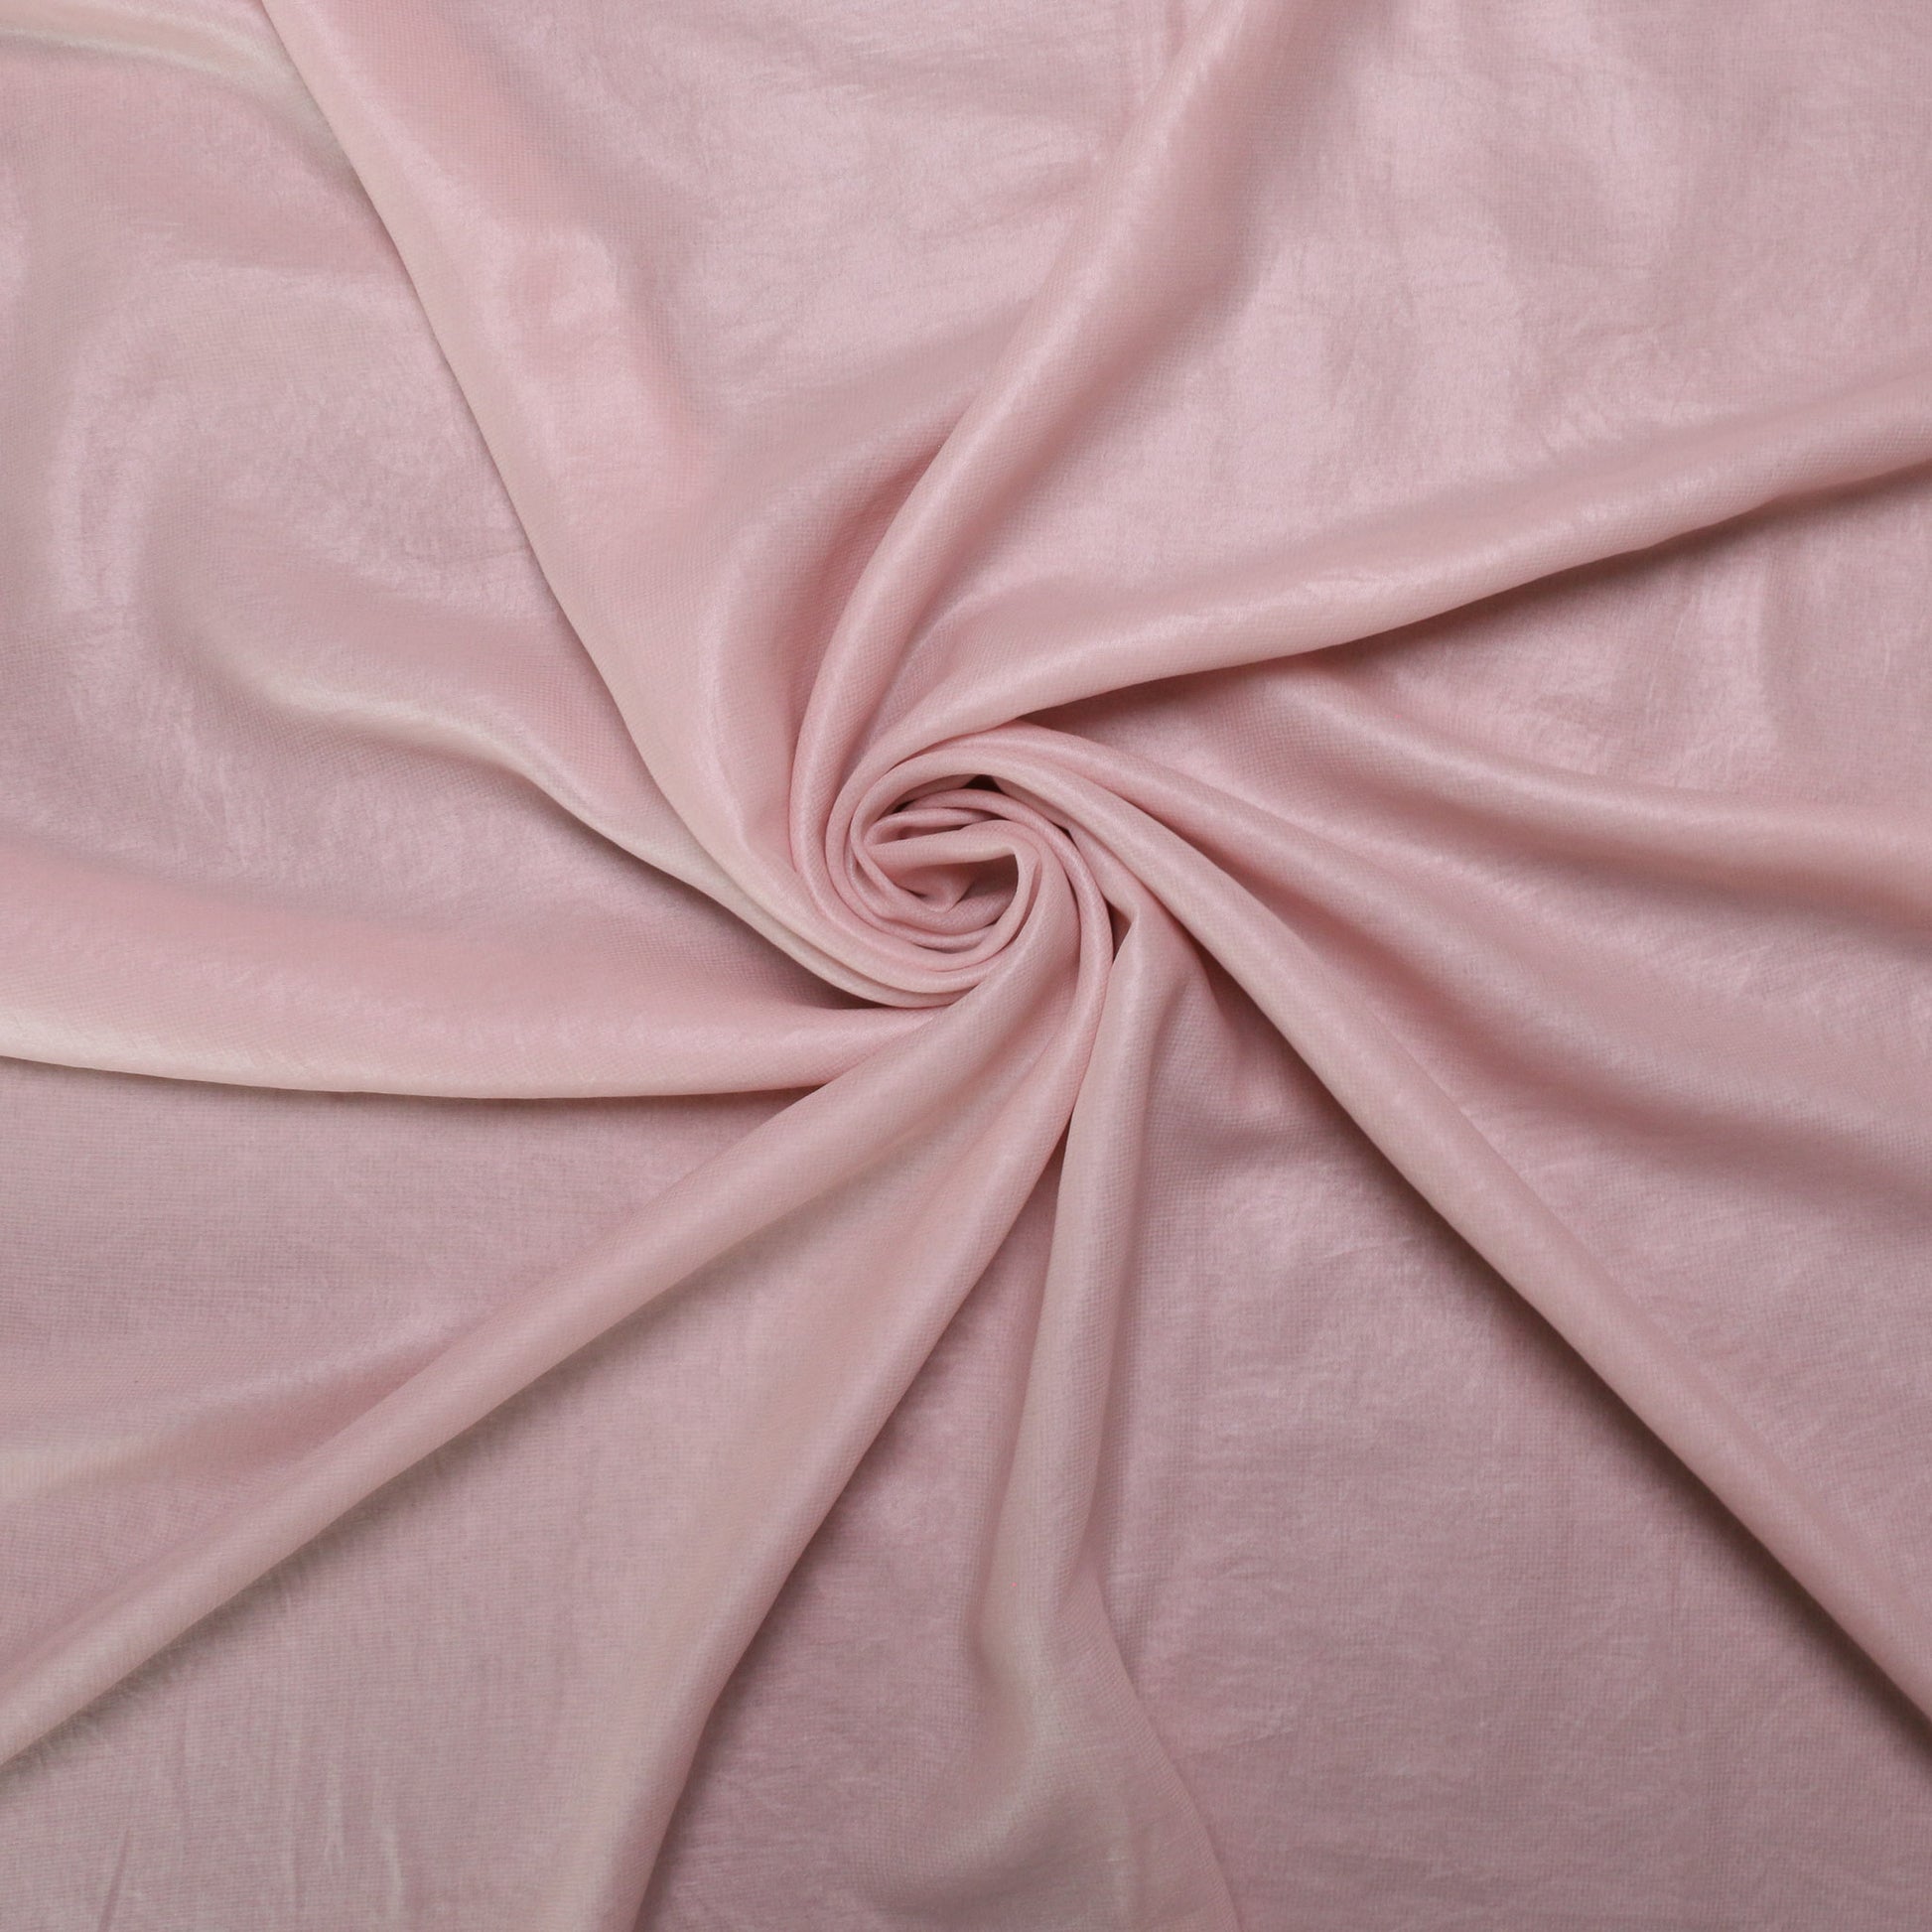 wet look polyester chiffon dressmaking fabric for sale in pink